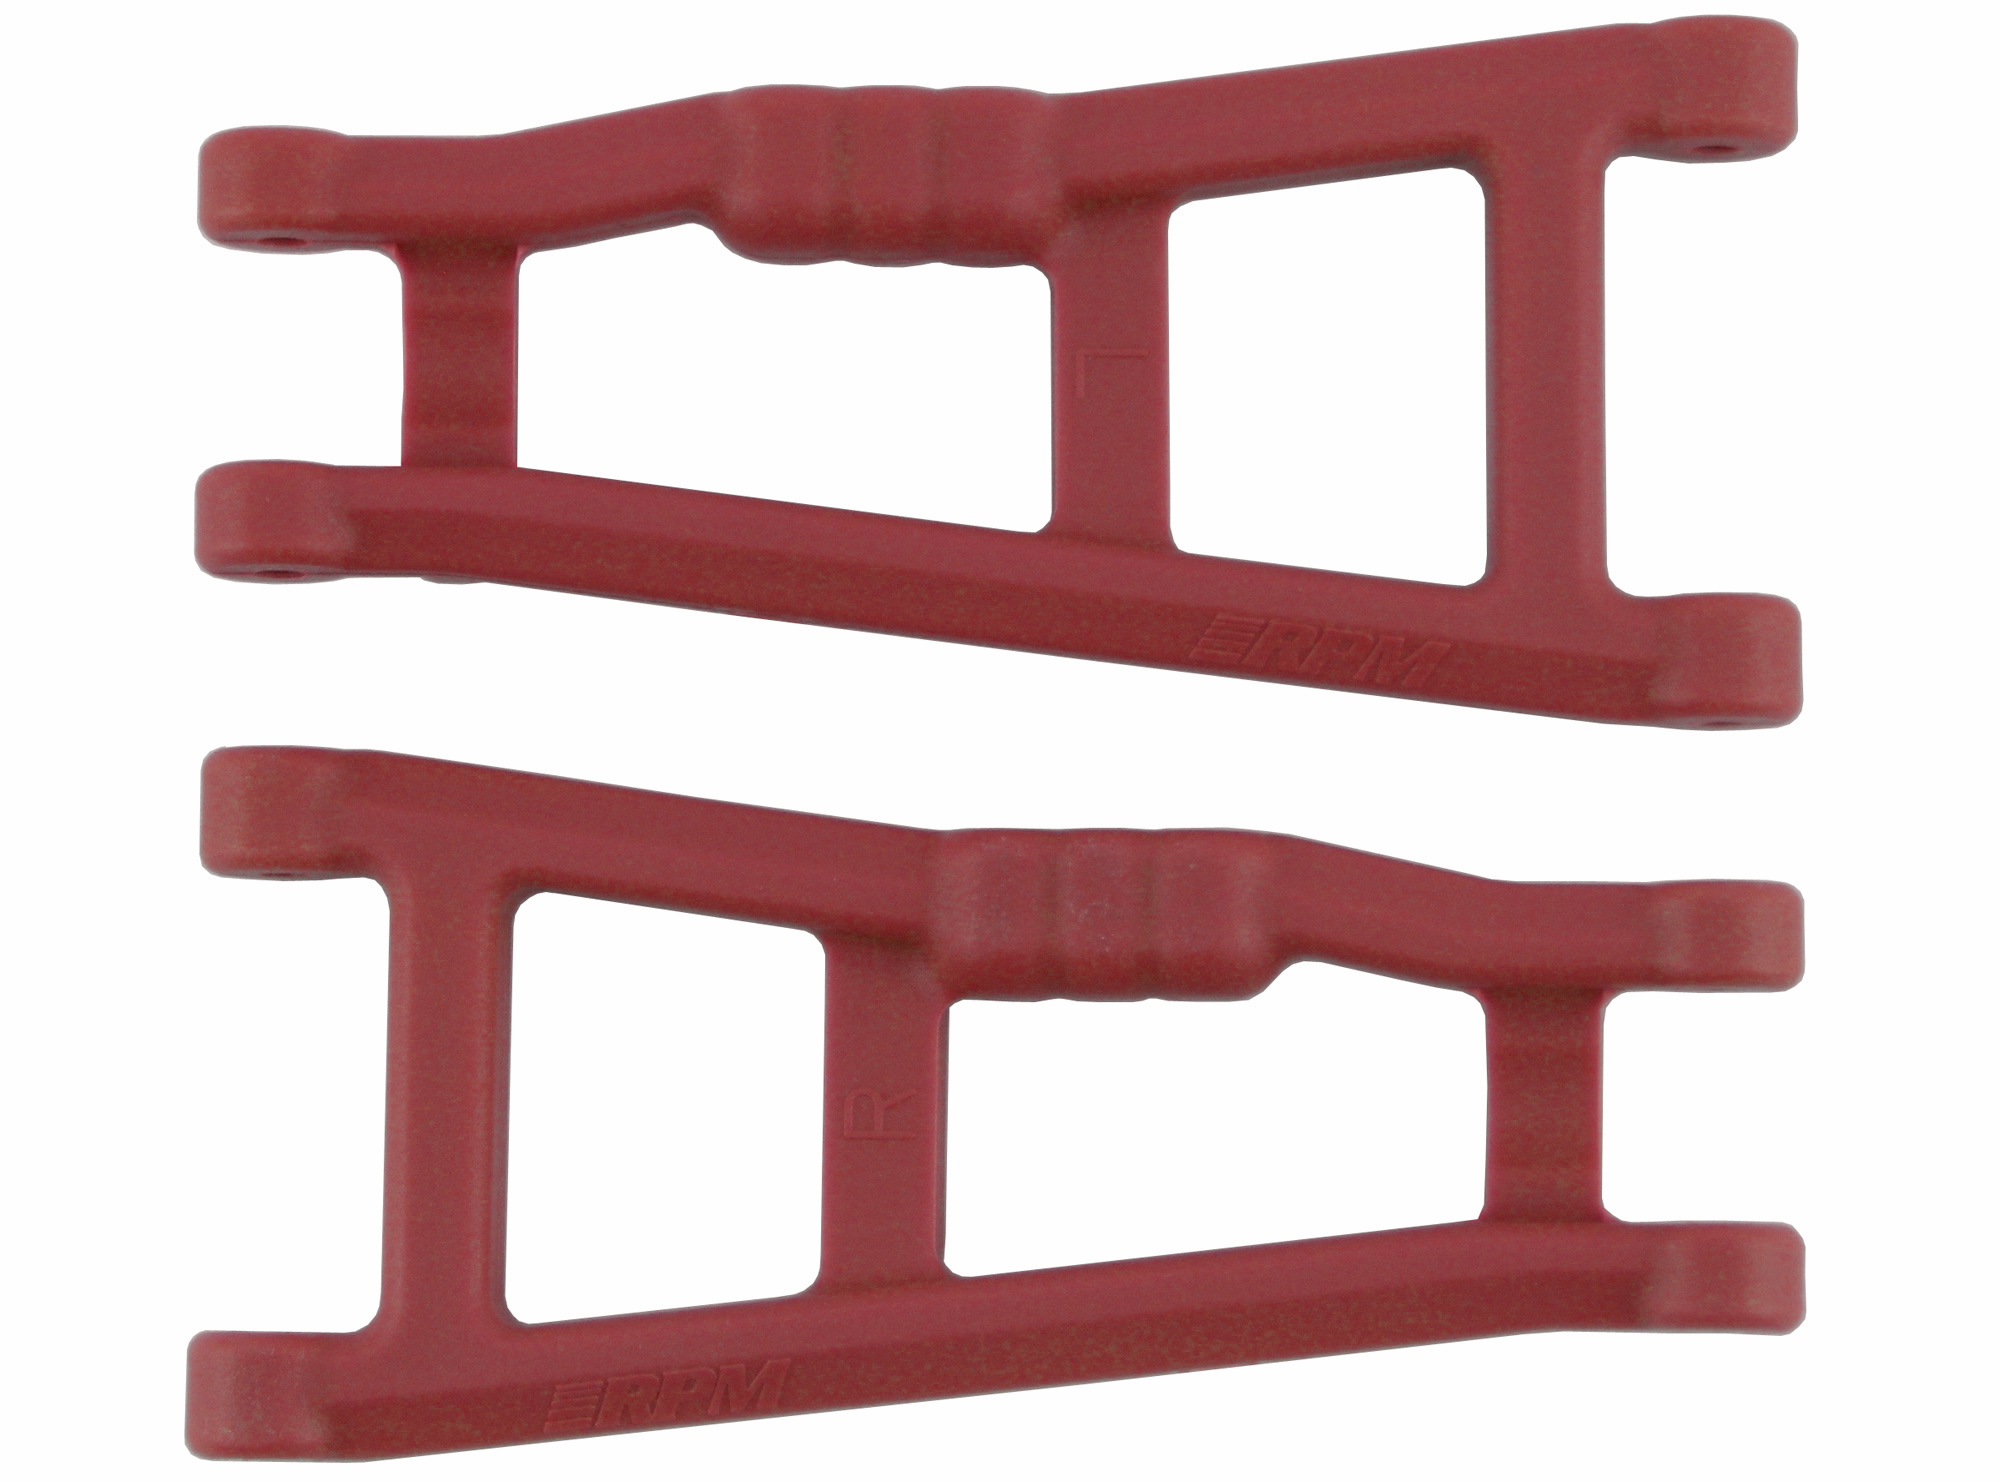 STRC RPM 80242 80182 A-Arms HINGE PINS FOR Traxxas Rustler & Stampede 2wd